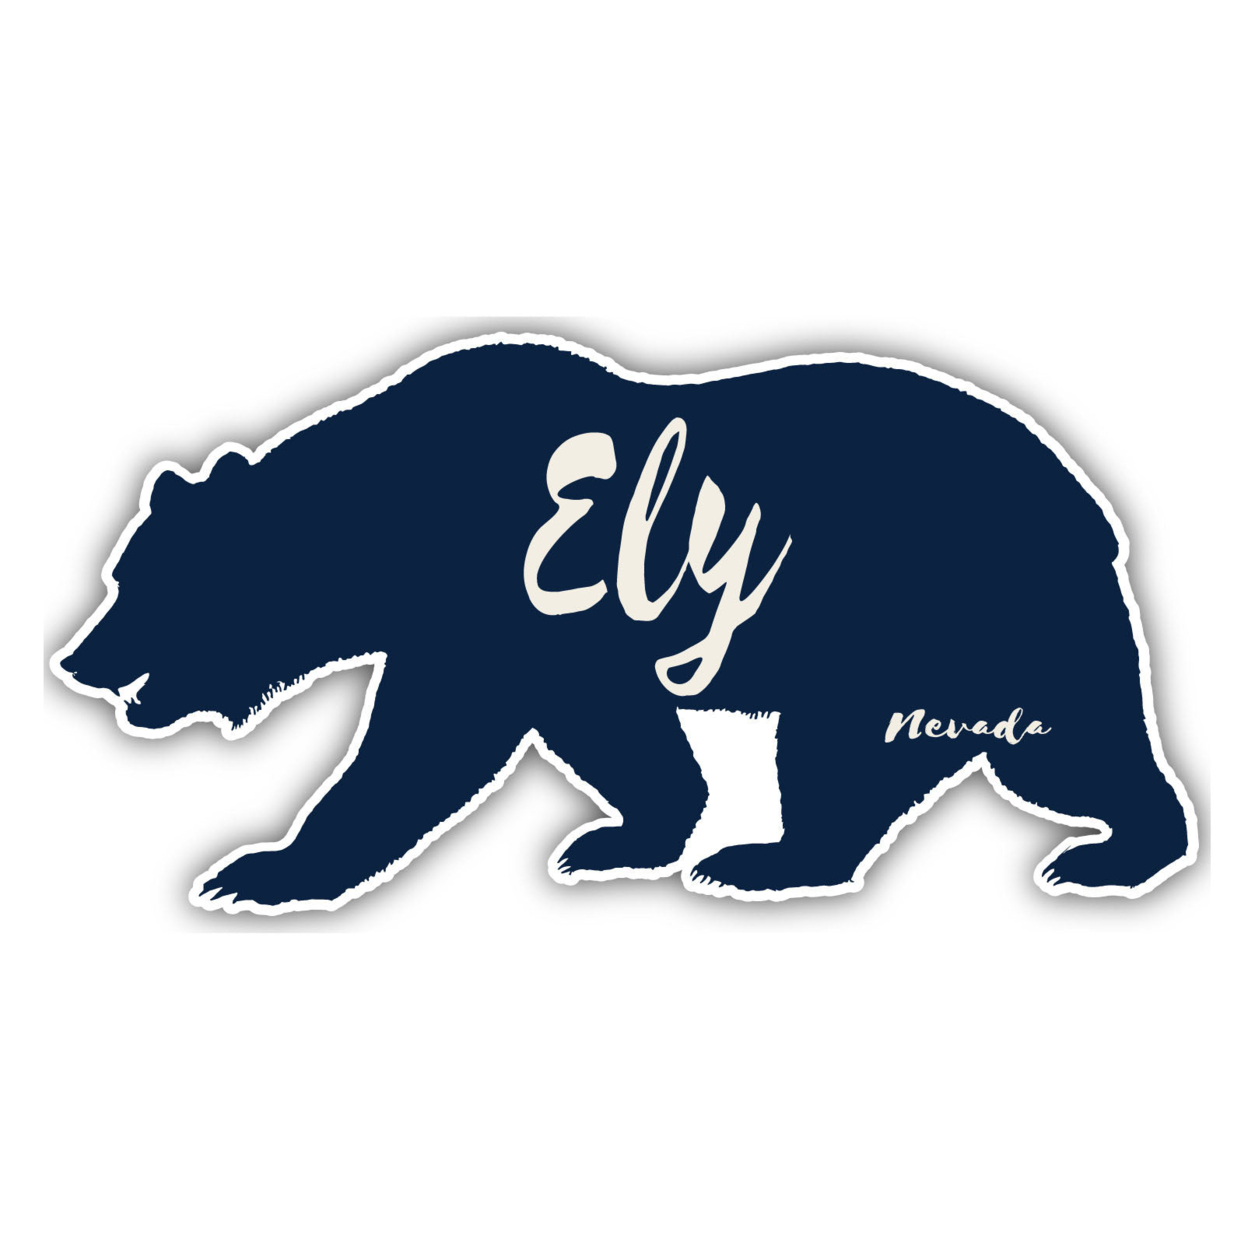 Ely Nevada Souvenir Decorative Stickers (Choose Theme And Size) - 4-Pack, 12-Inch, Bear